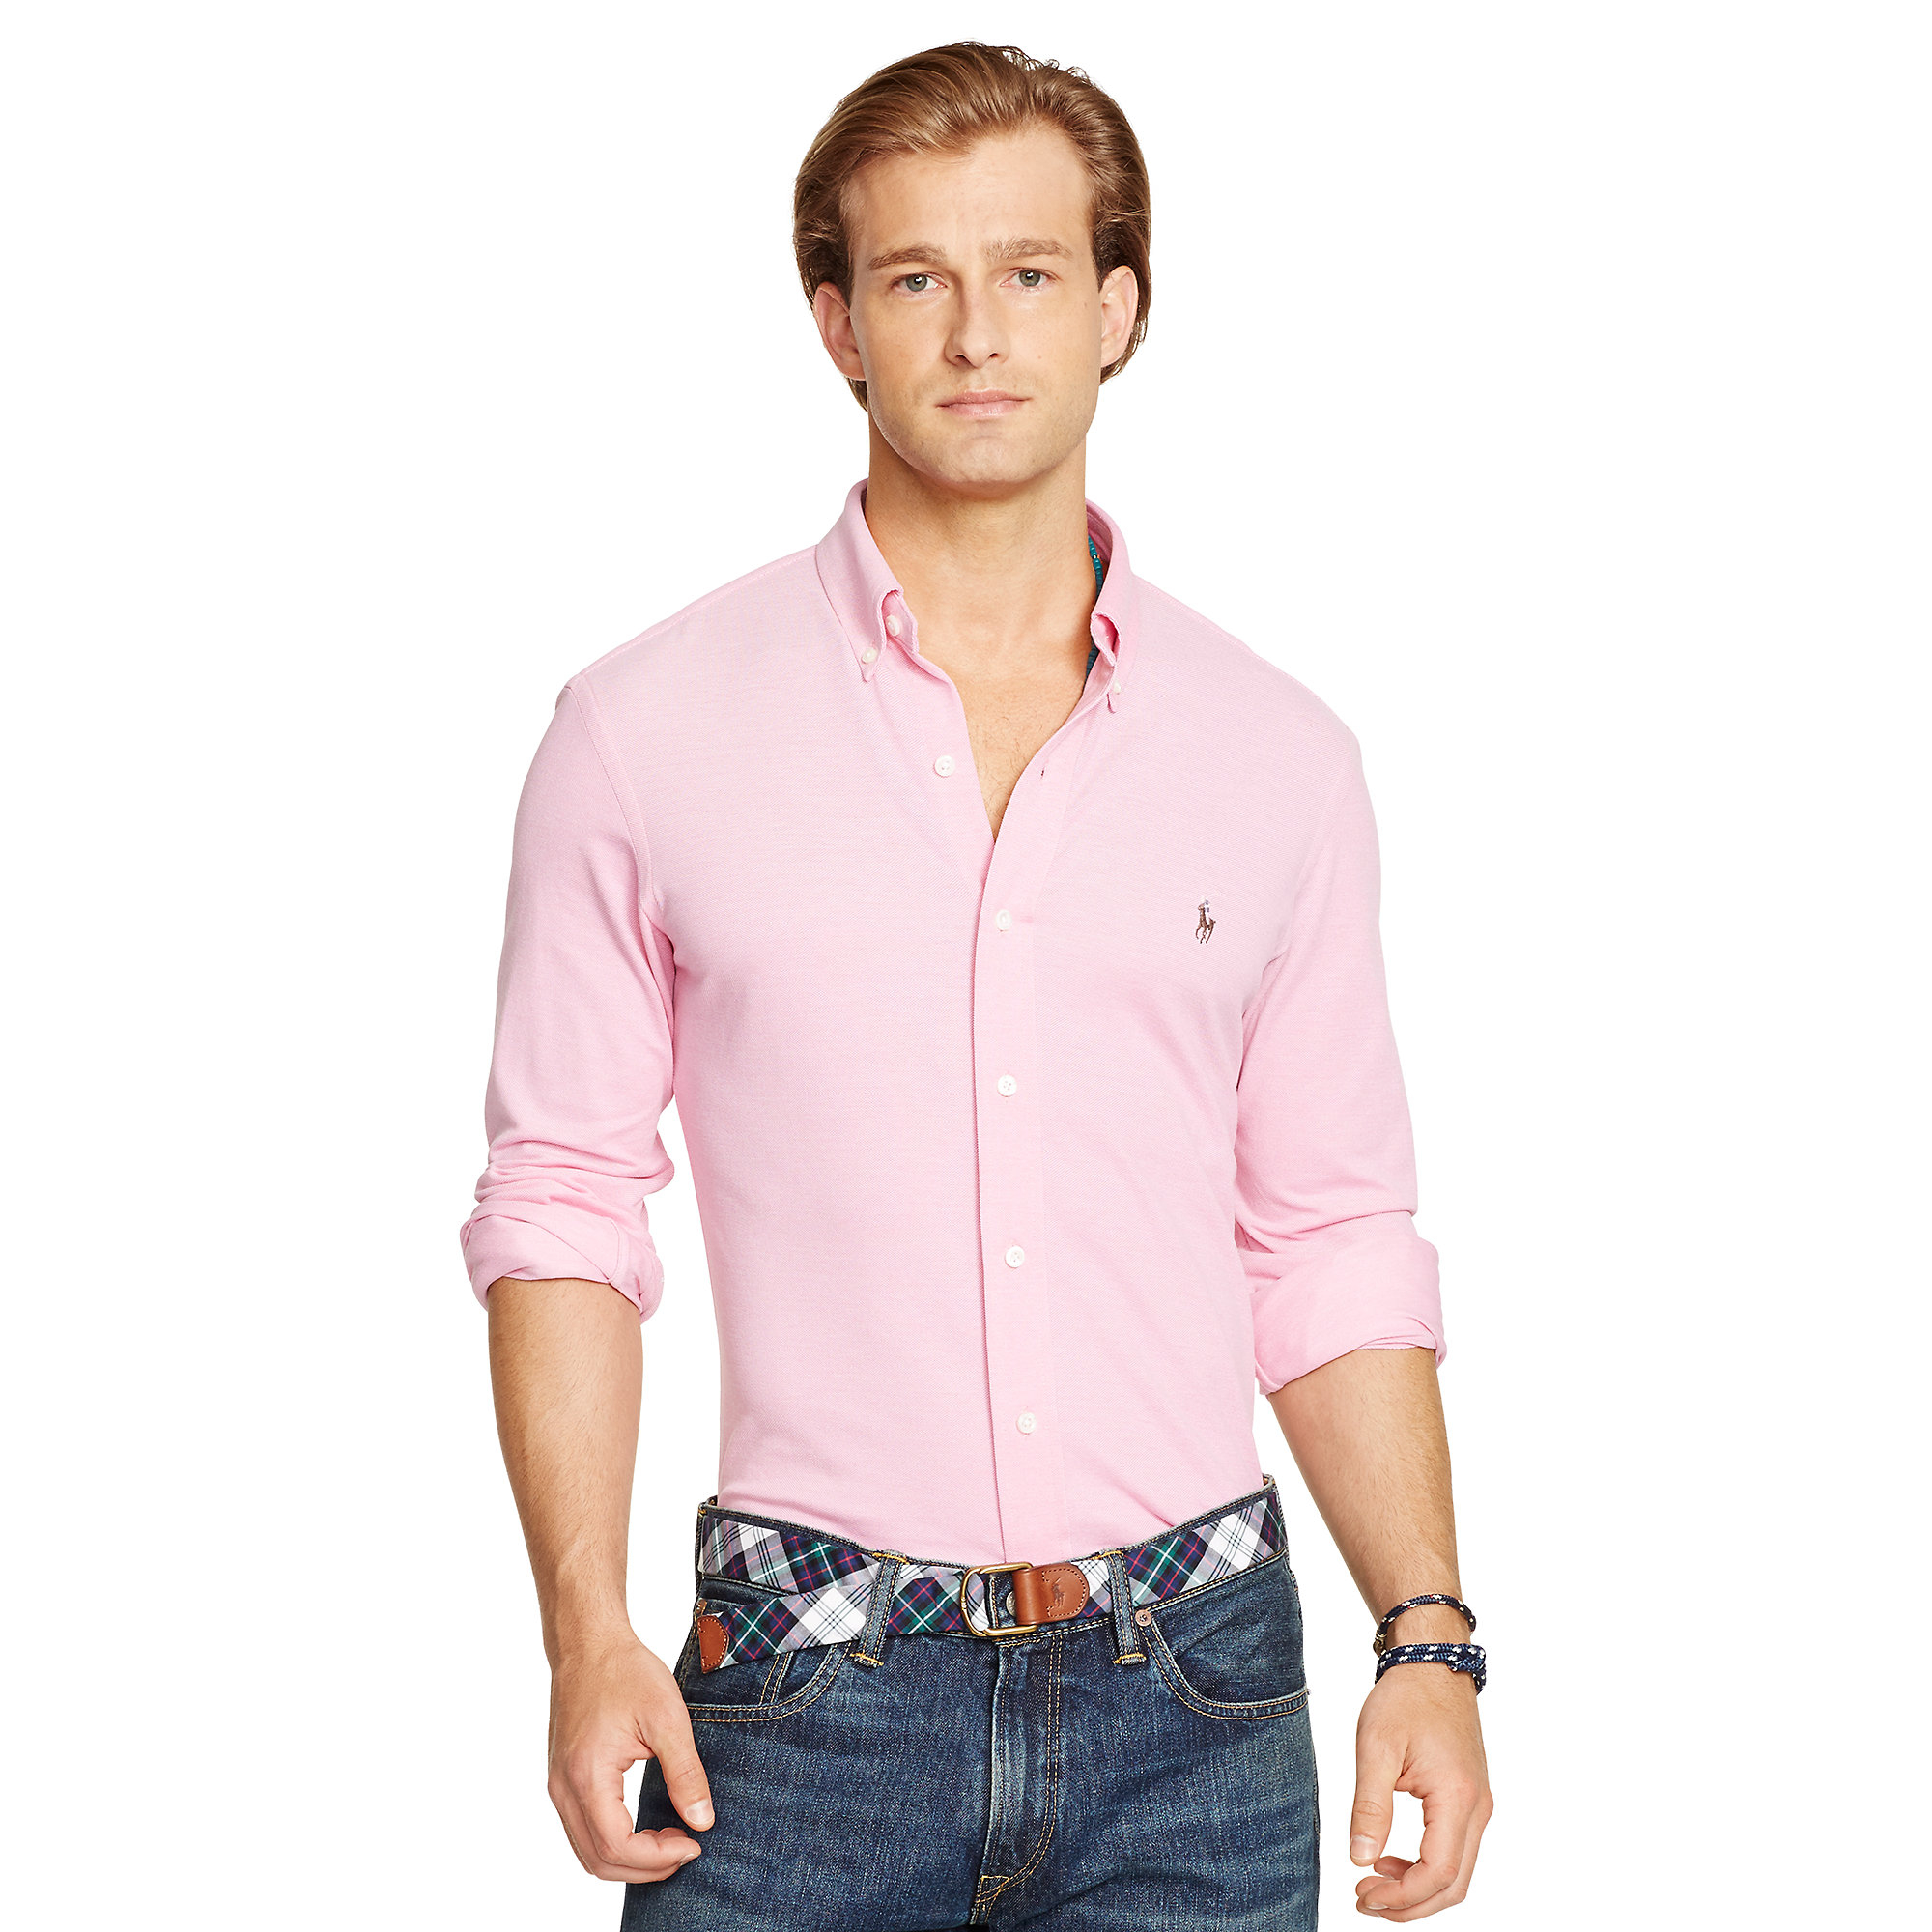 Polo Ralph Lauren Slim-fit Knit Oxford Shirt in Pink for Men - Lyst